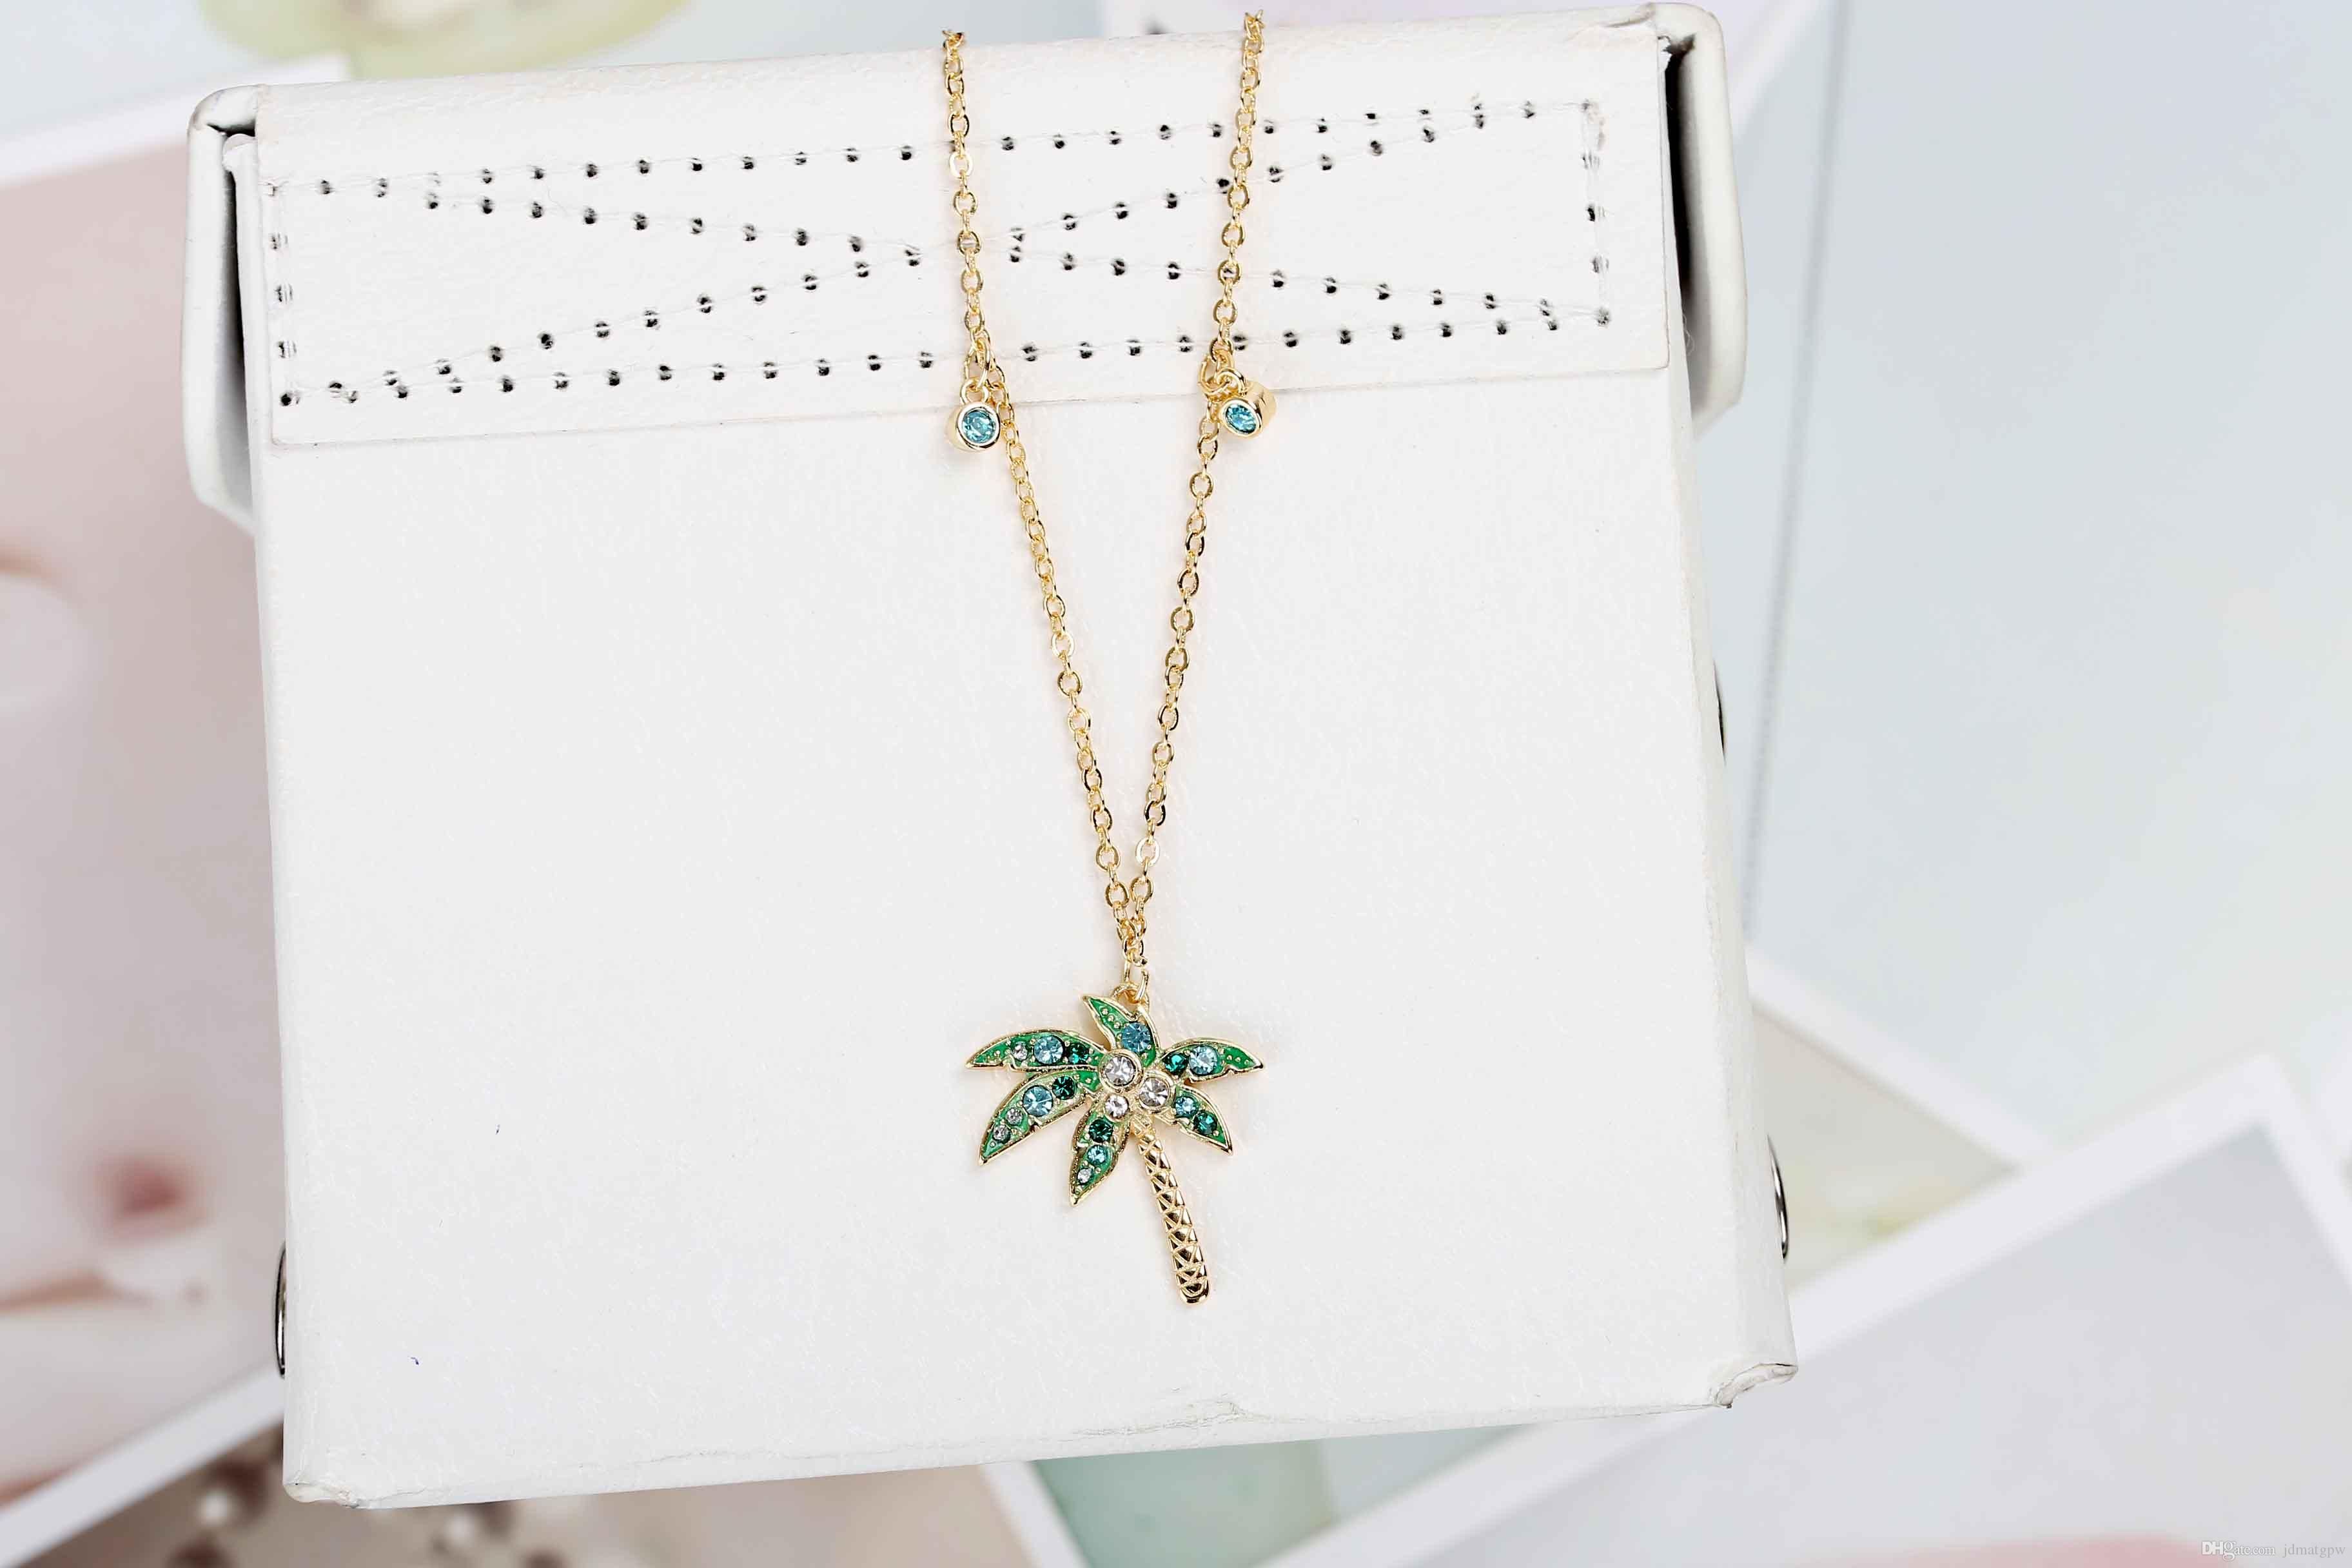 Ime Palm Tree Coconut Pendant Necklace Tropical Style Trend Necklace Female  Swan This Beautiful Logostl New Counter Original Custom Counter Intended For Best And Newest Tropical Palm Pendant Necklaces (View 4 of 25)